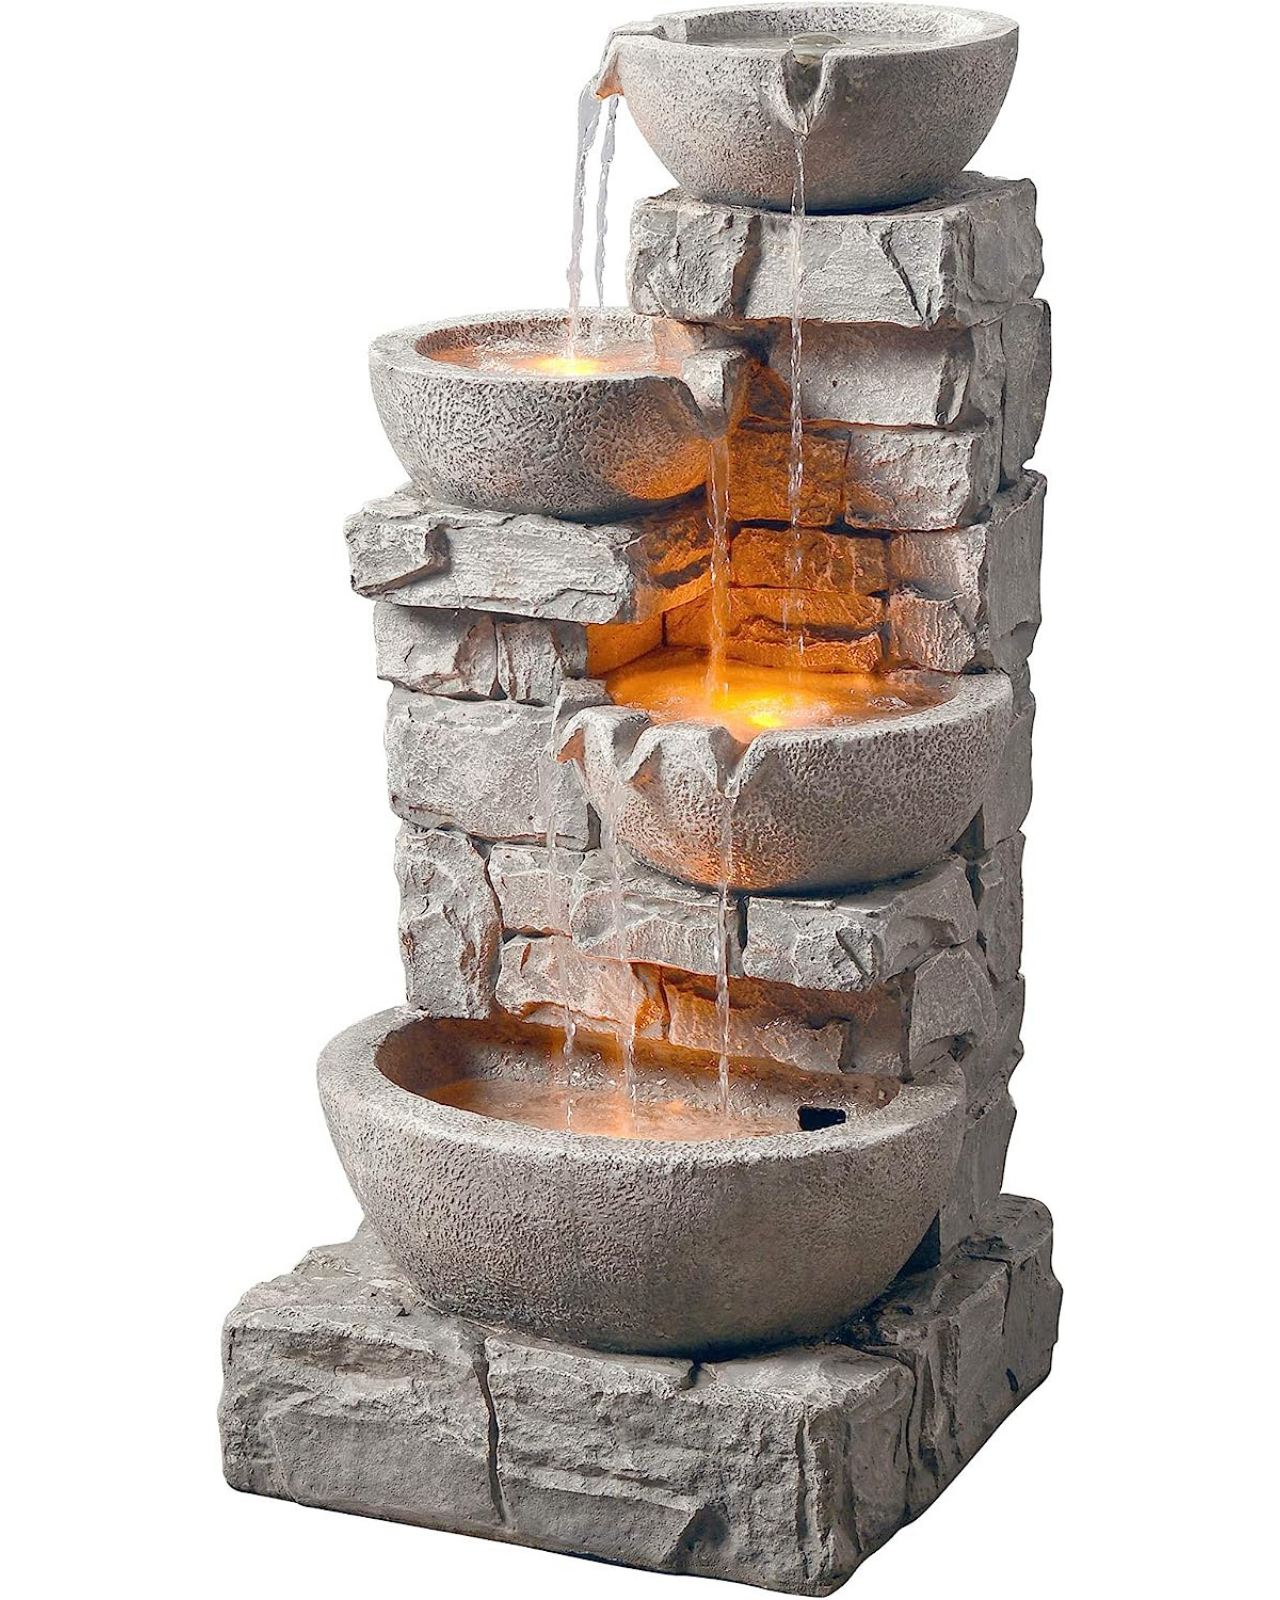 Opal - 4 Tier Lighting Bowls Water Feature Fountain